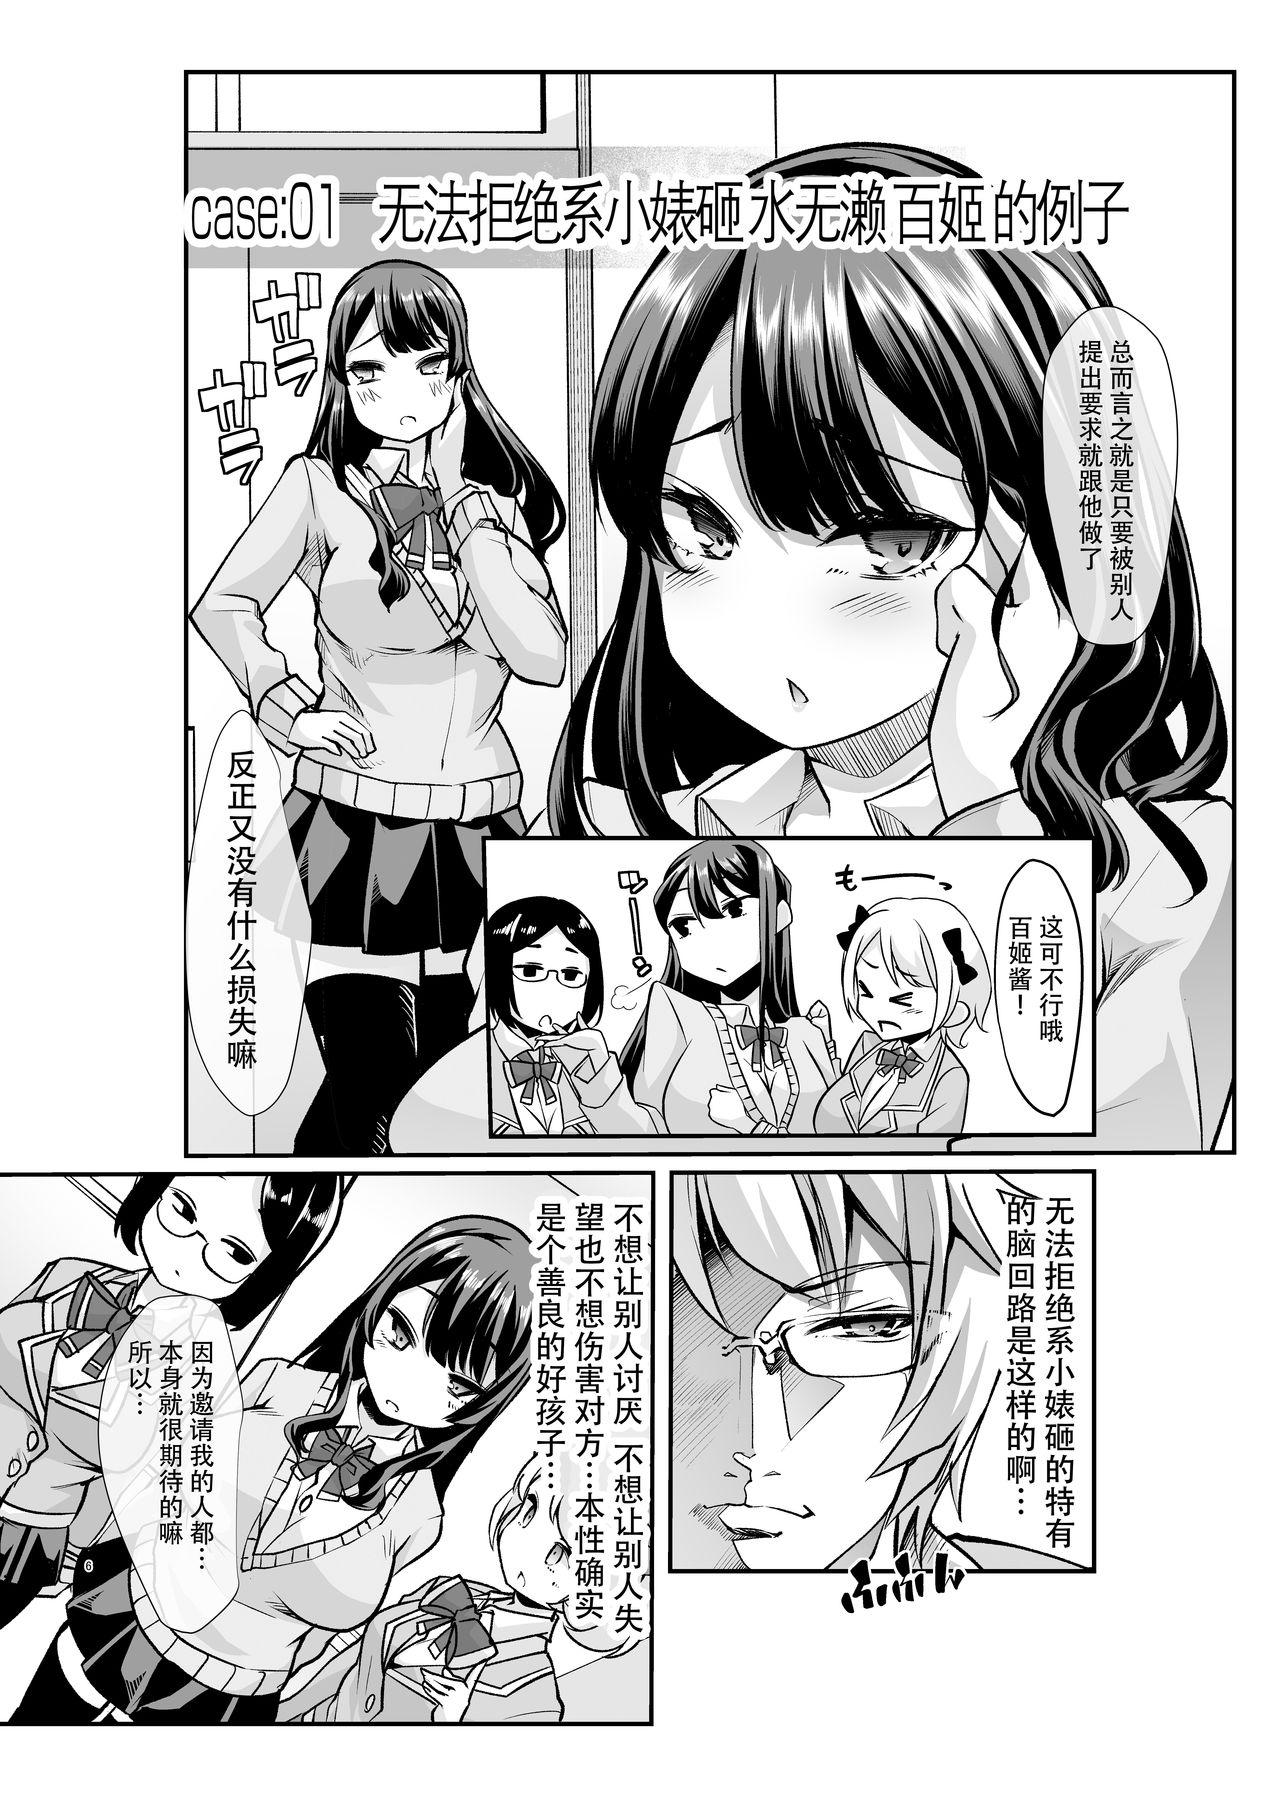 8teenxxx Any girl can do it! Bitch Zukan-I could have a harem if I solved various problems of Saseko～ - Original Fun - Page 6